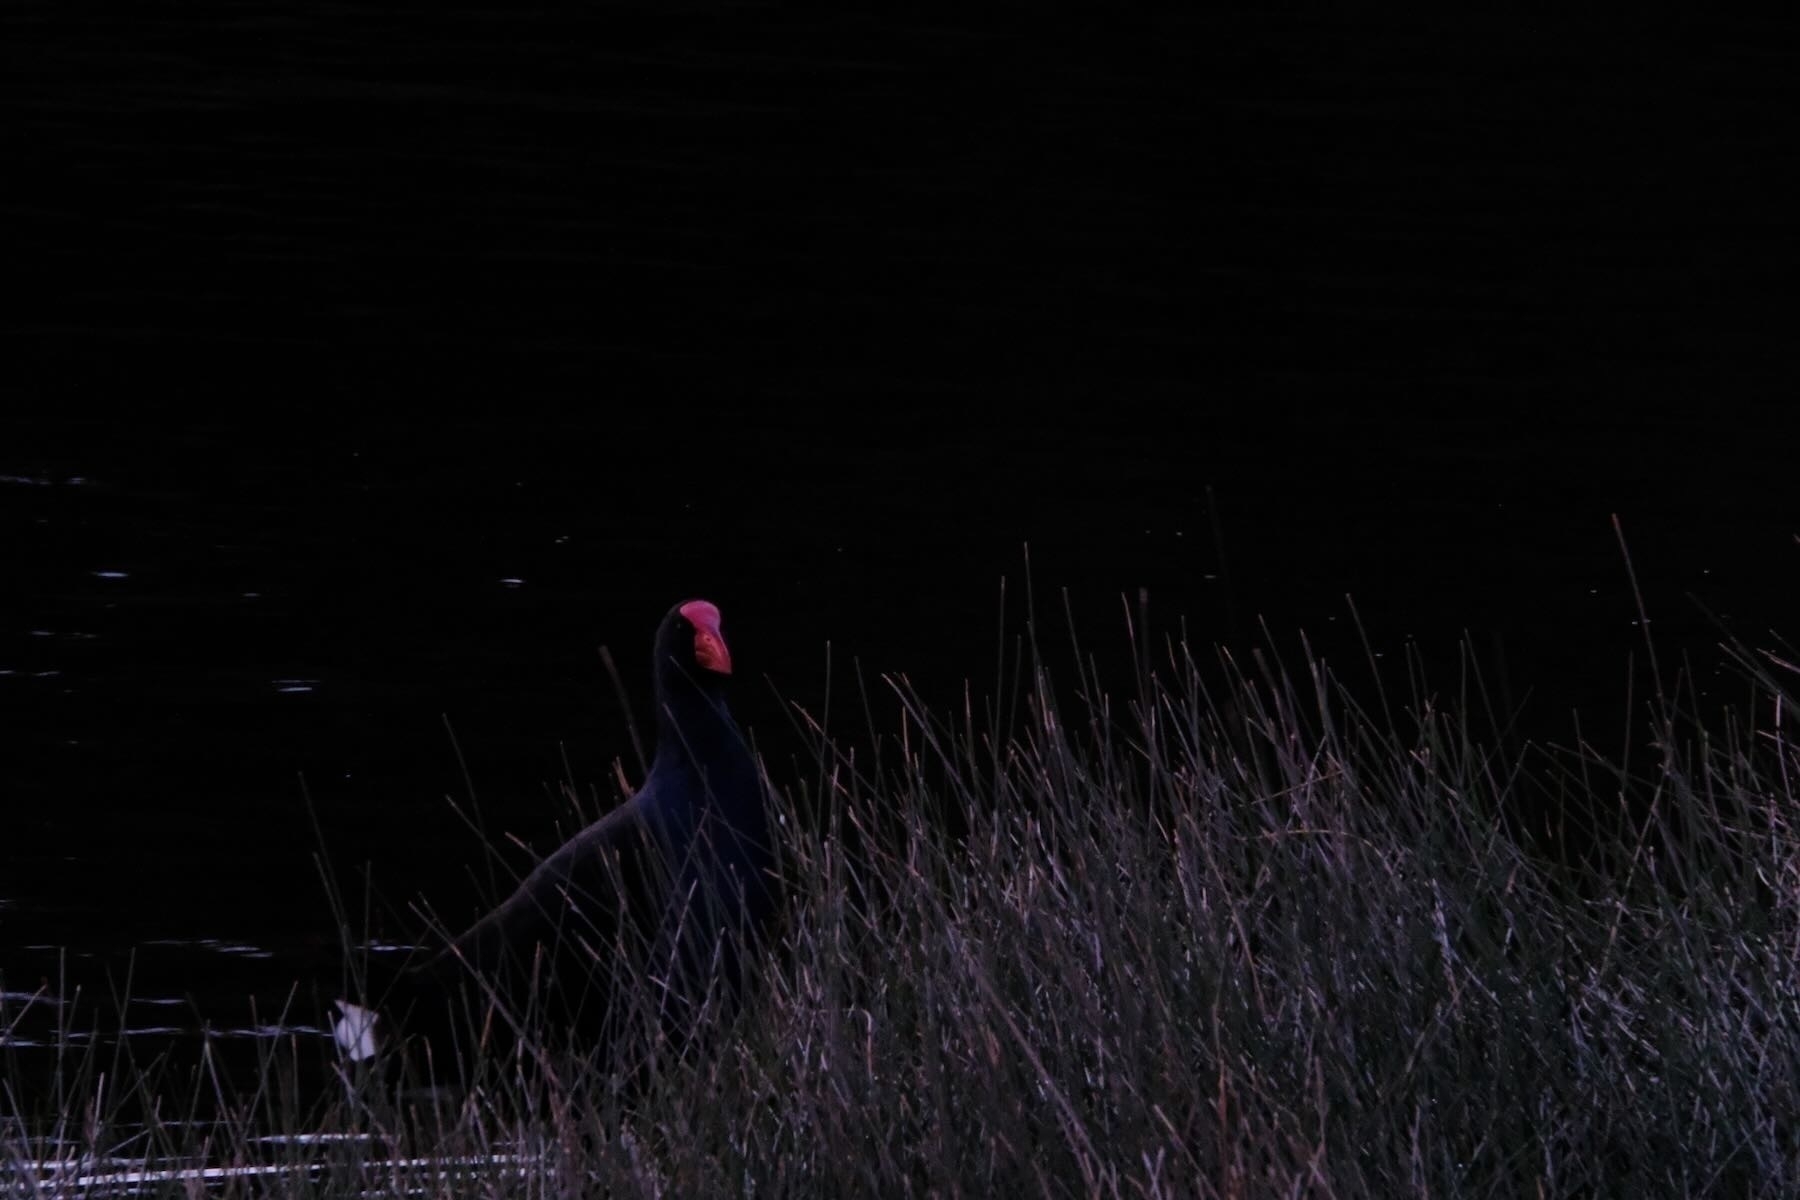 Dark bird with glowing red face shield beside almost glowing rushes, everything else black. 